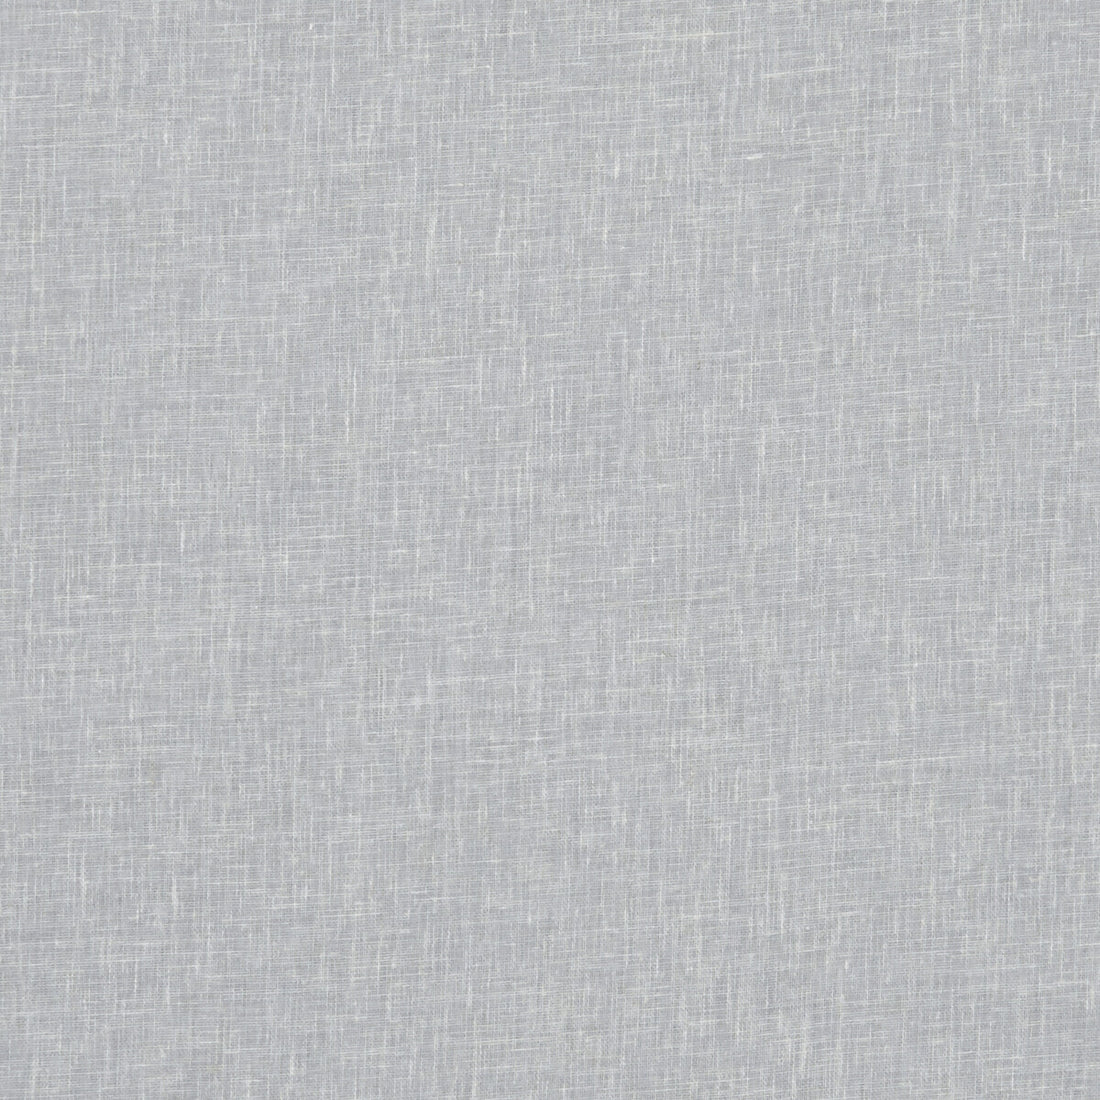 Midori fabric in mist color - pattern F1068/28.CAC.0 - by Clarke And Clarke in the Clarke &amp; Clarke Midori collection